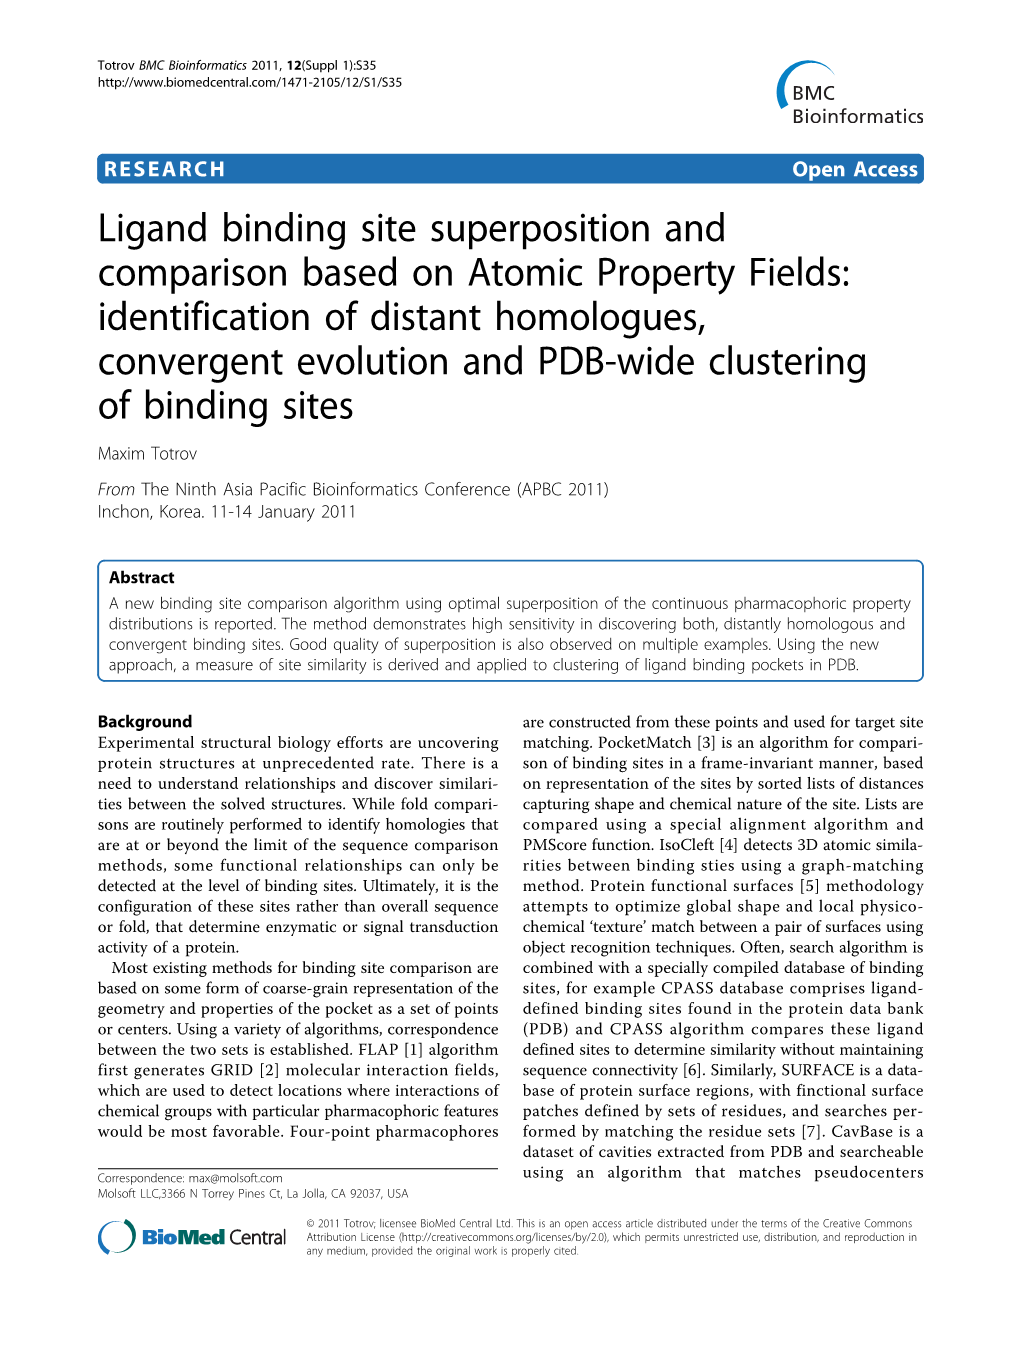 Ligand Binding Site Superposition and Comparison Based on Atomic